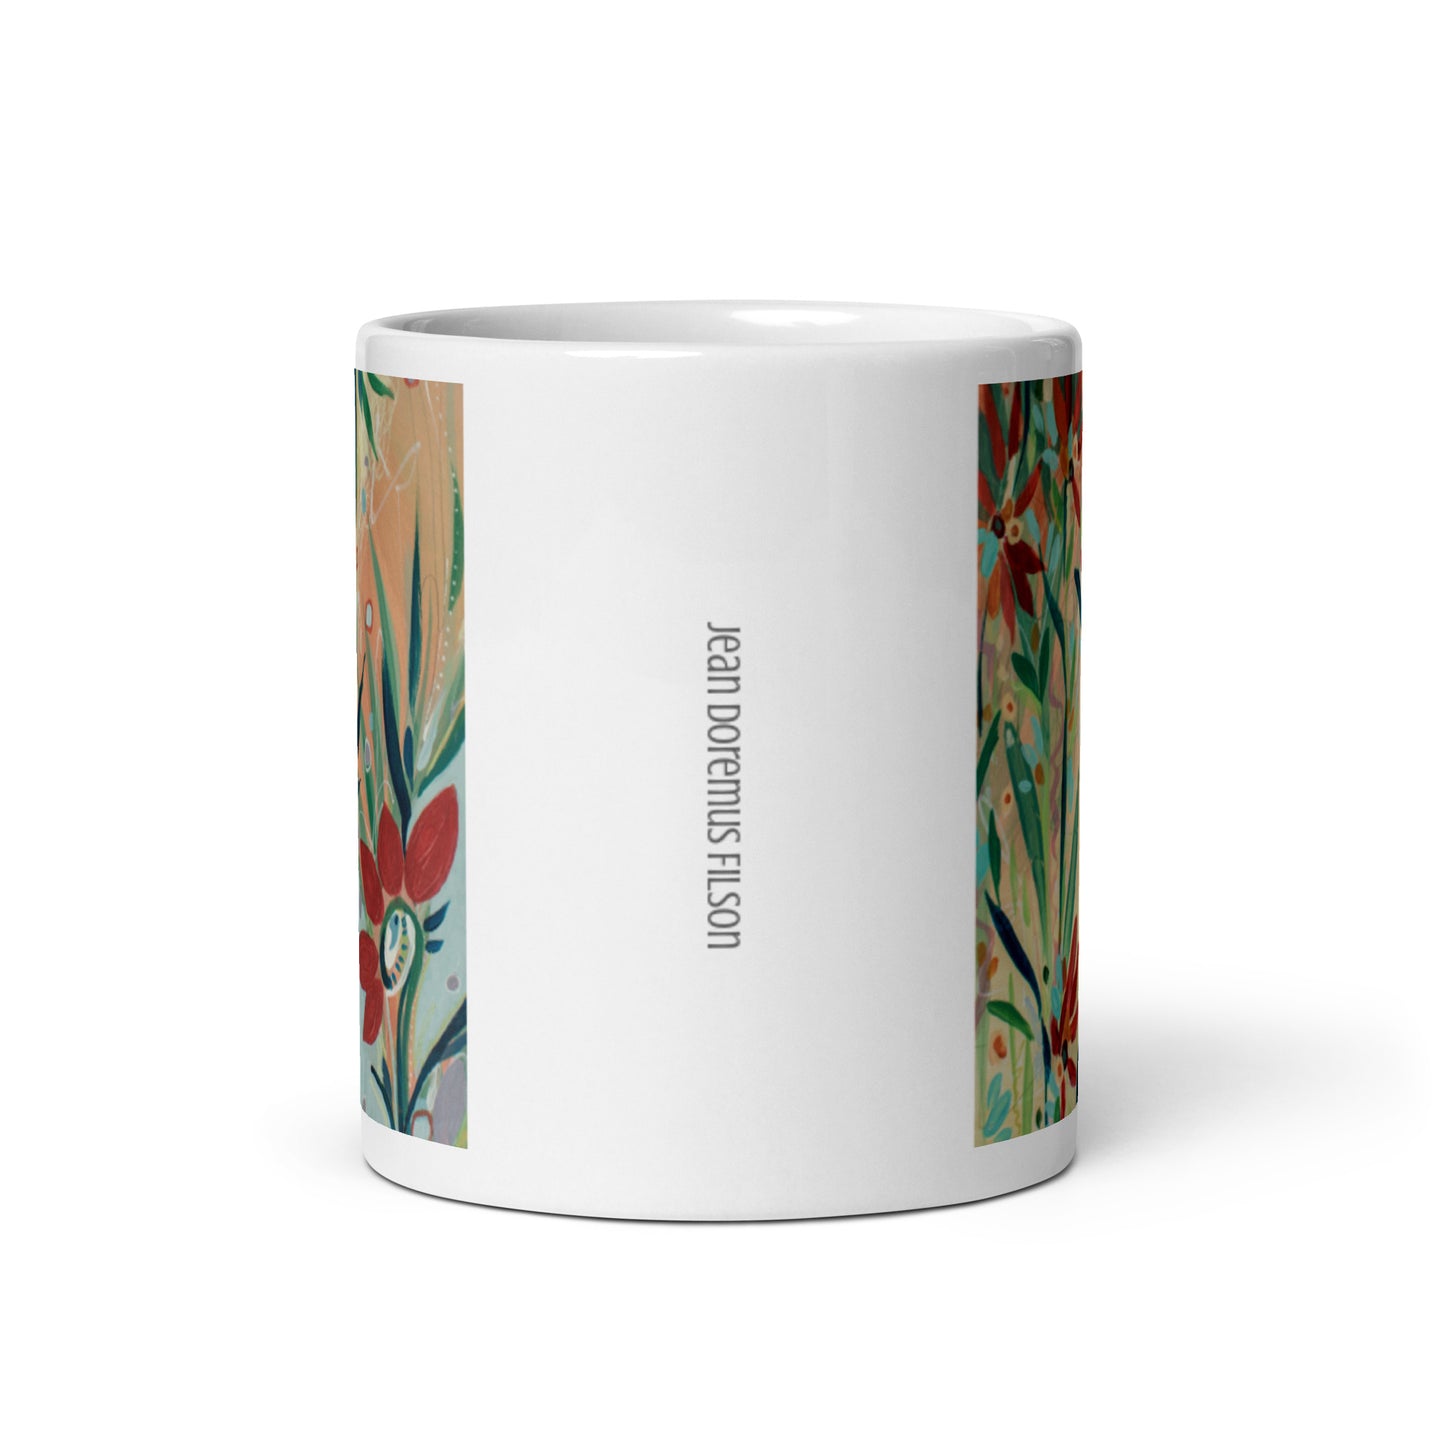 Footsteps in the Distance, 2-3 White glossy mug